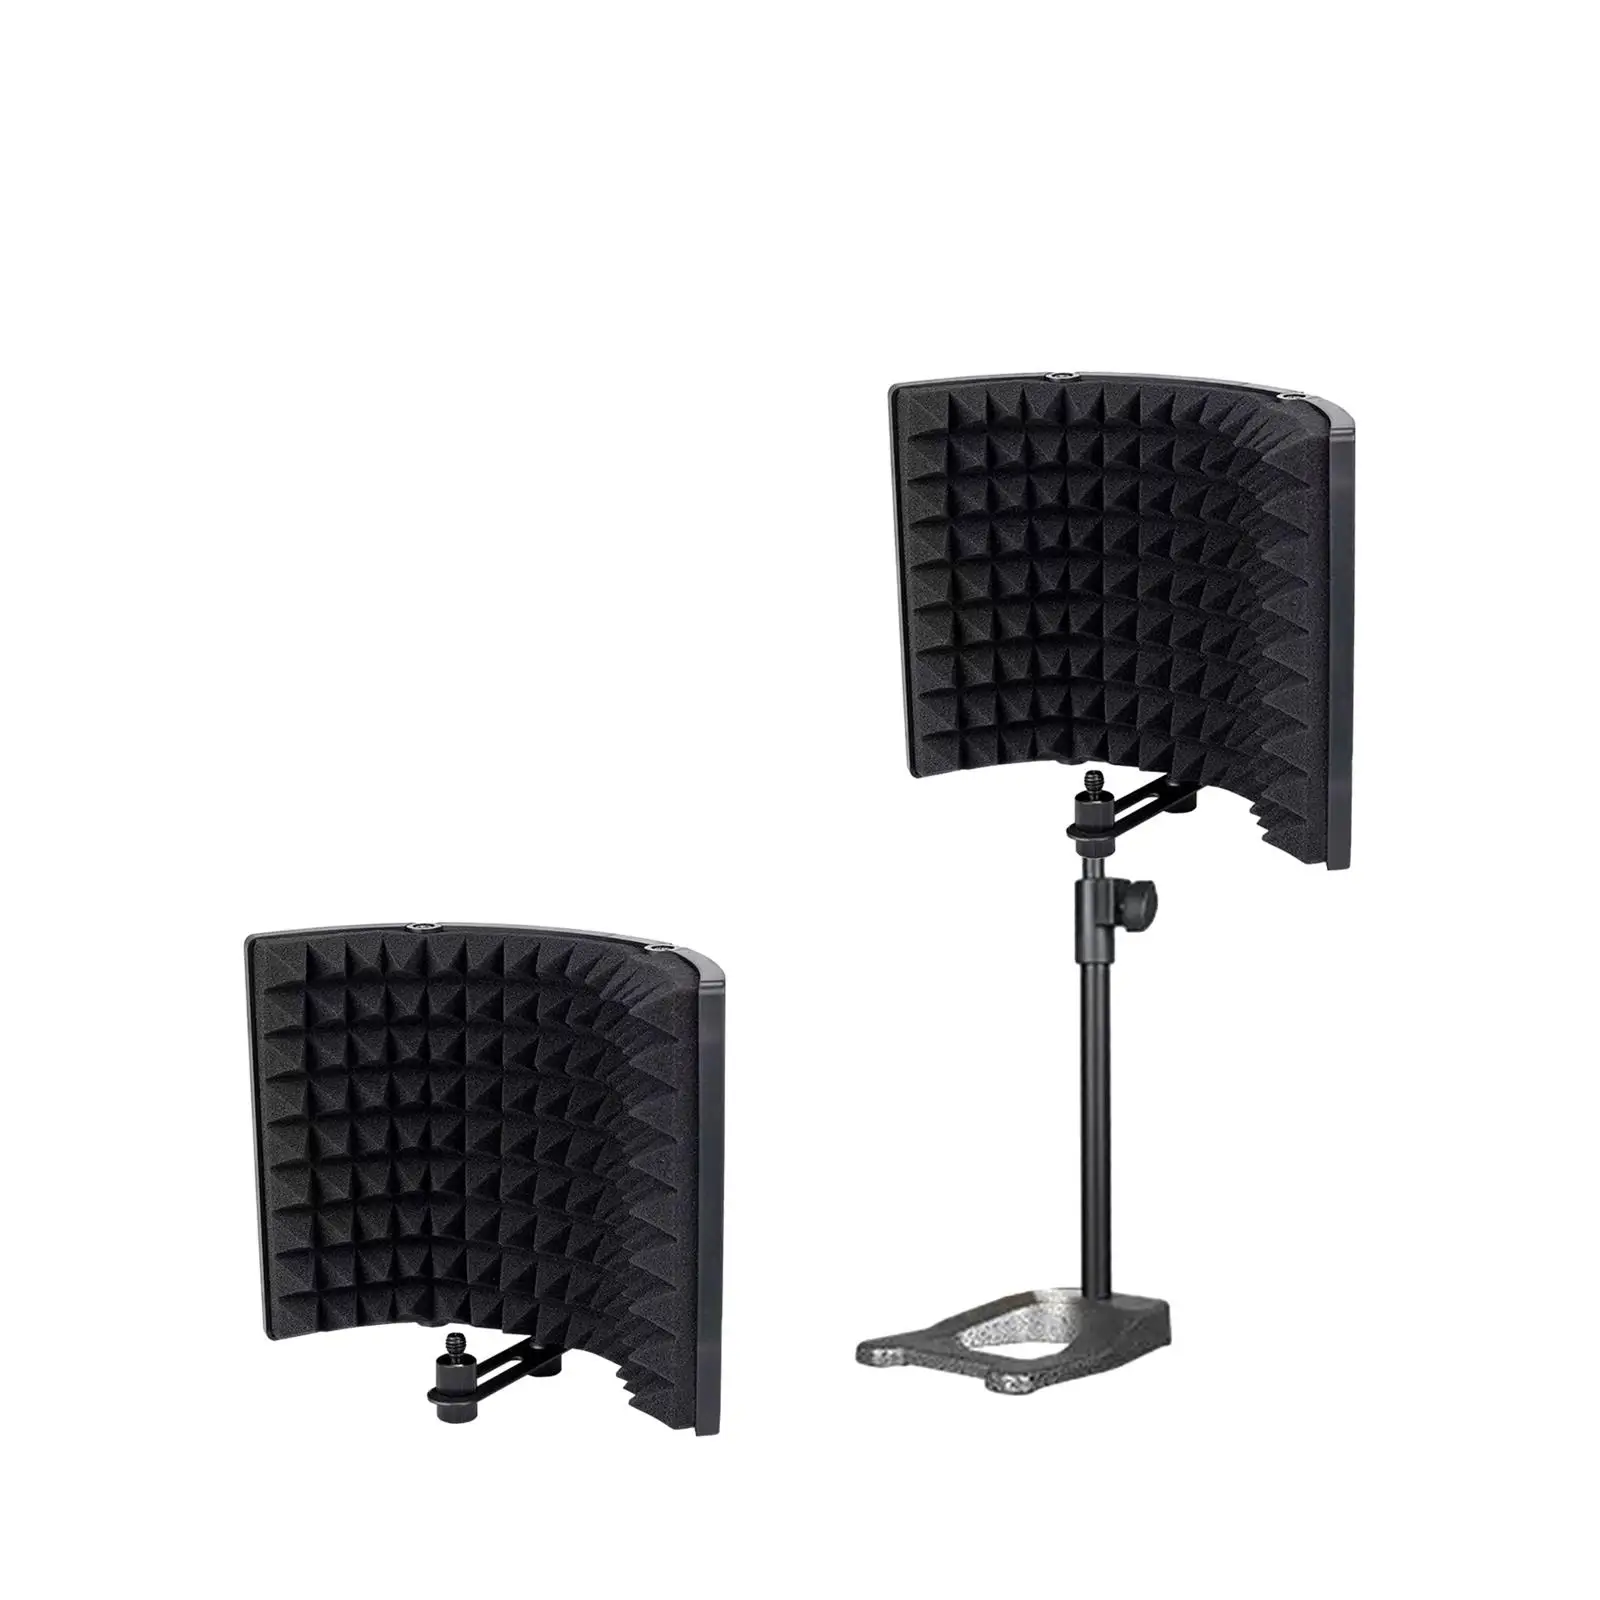 3 Panels Microphone Isolation Shield Adjustable Foldable Vocal Recording Panel Wind Screen for Podcasts Recording Studio